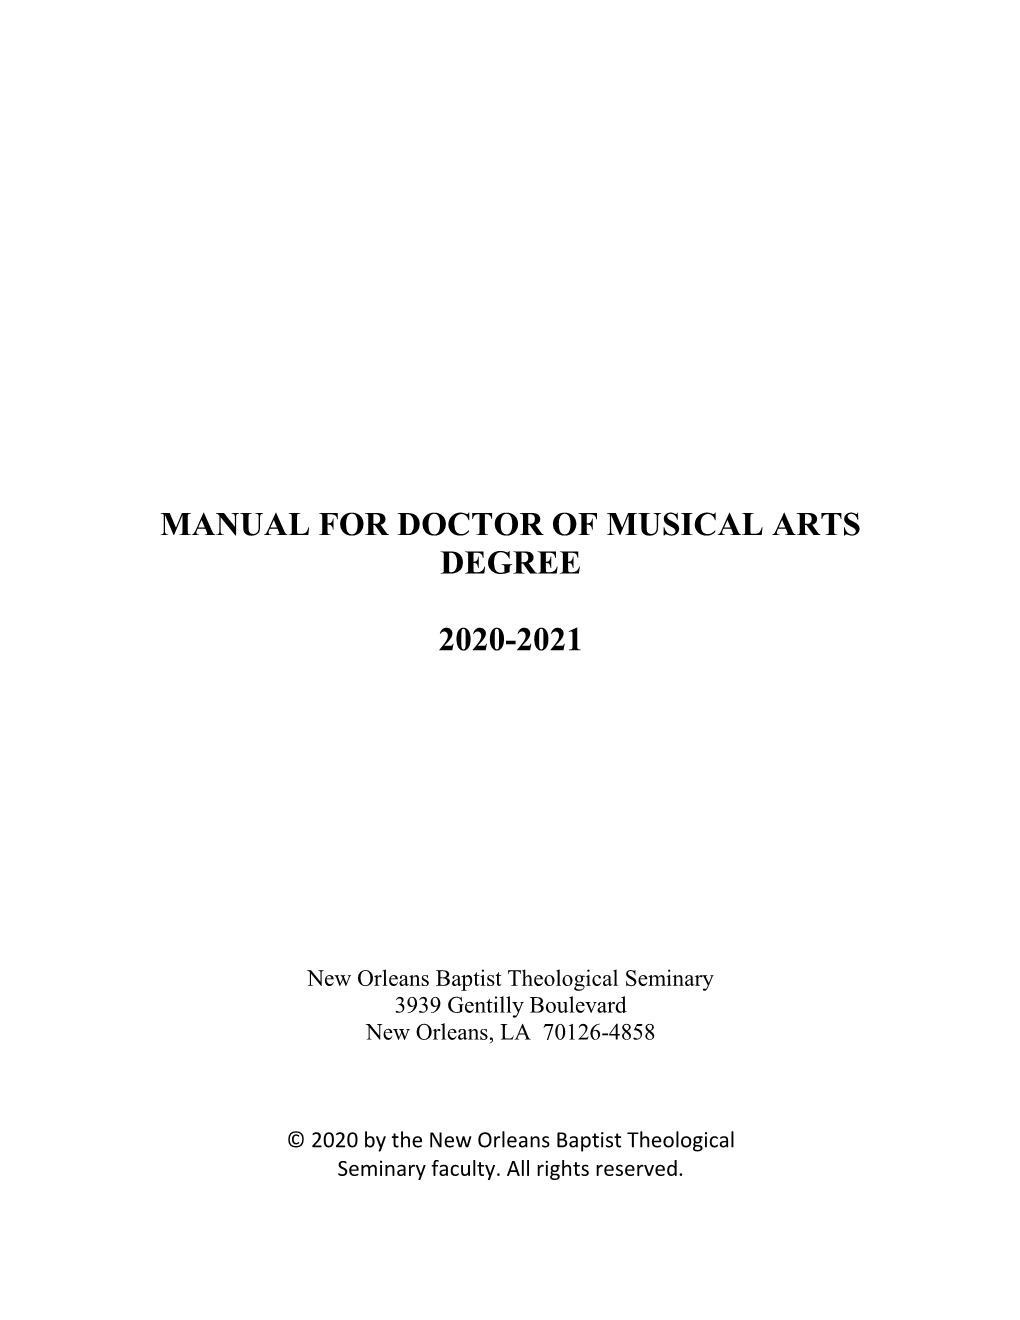 Manual for Doctor of Musical Arts Degree 2020-2021